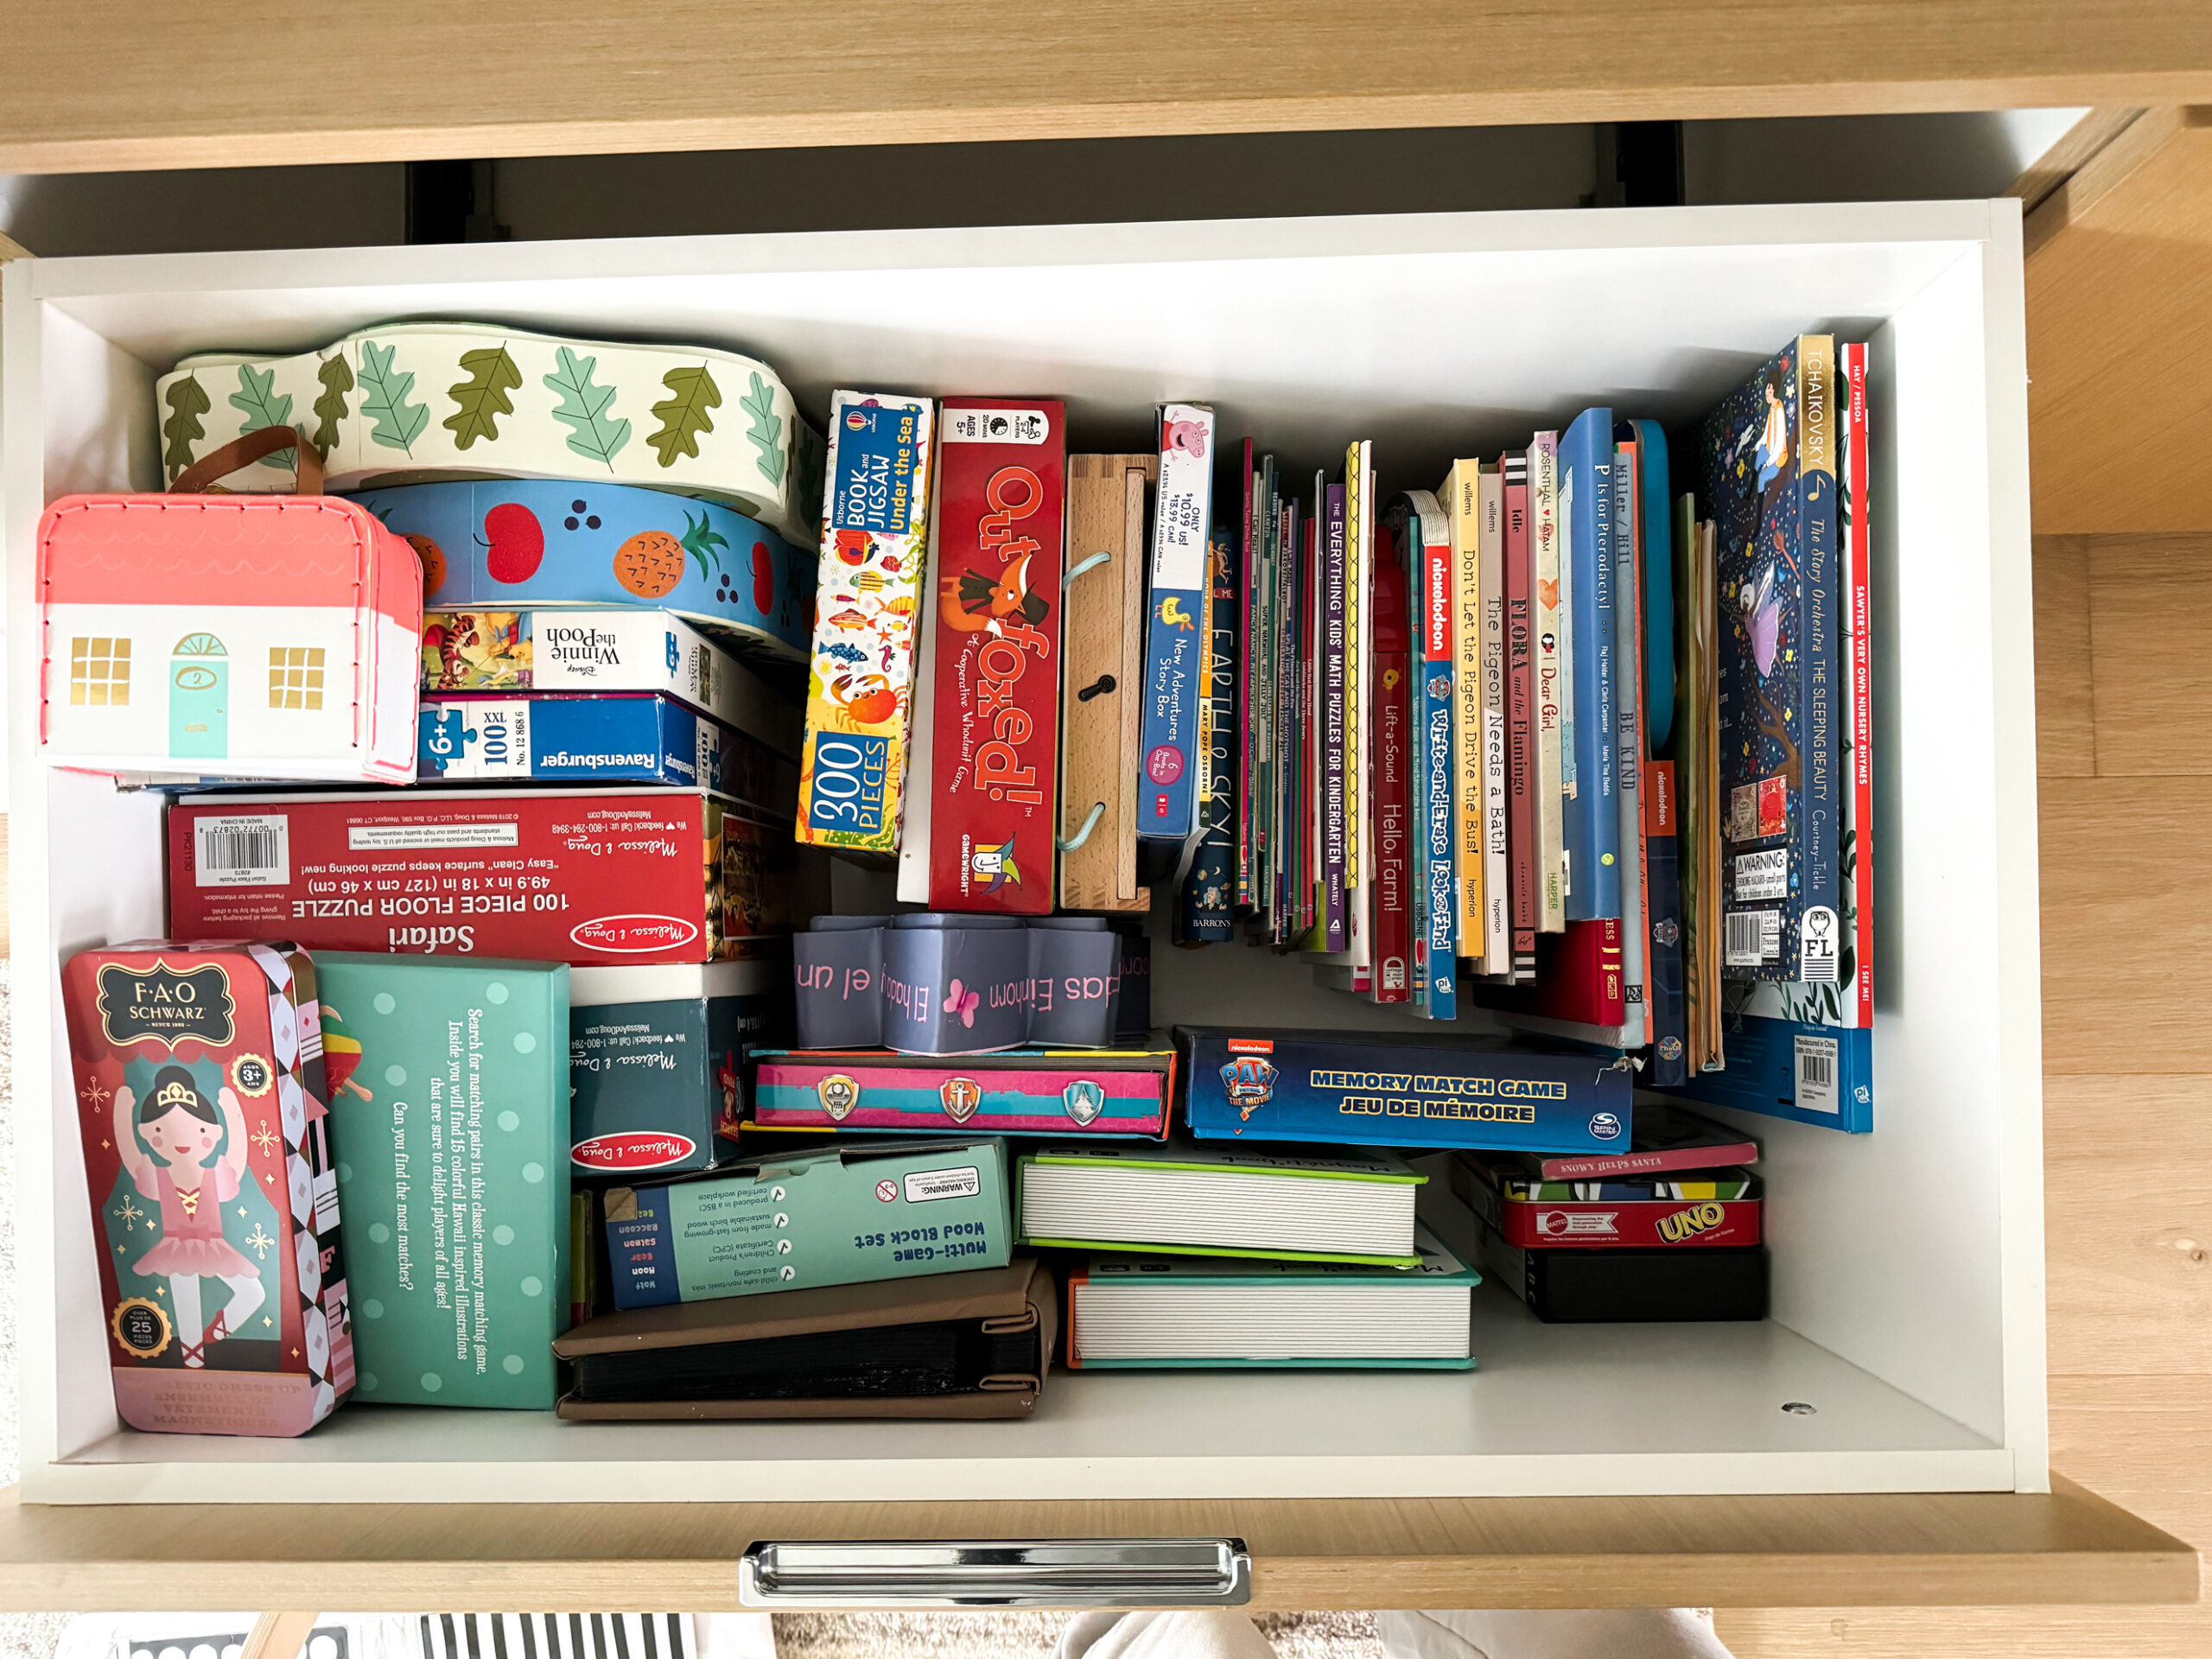 Kids' toys hiding in built-in drawers